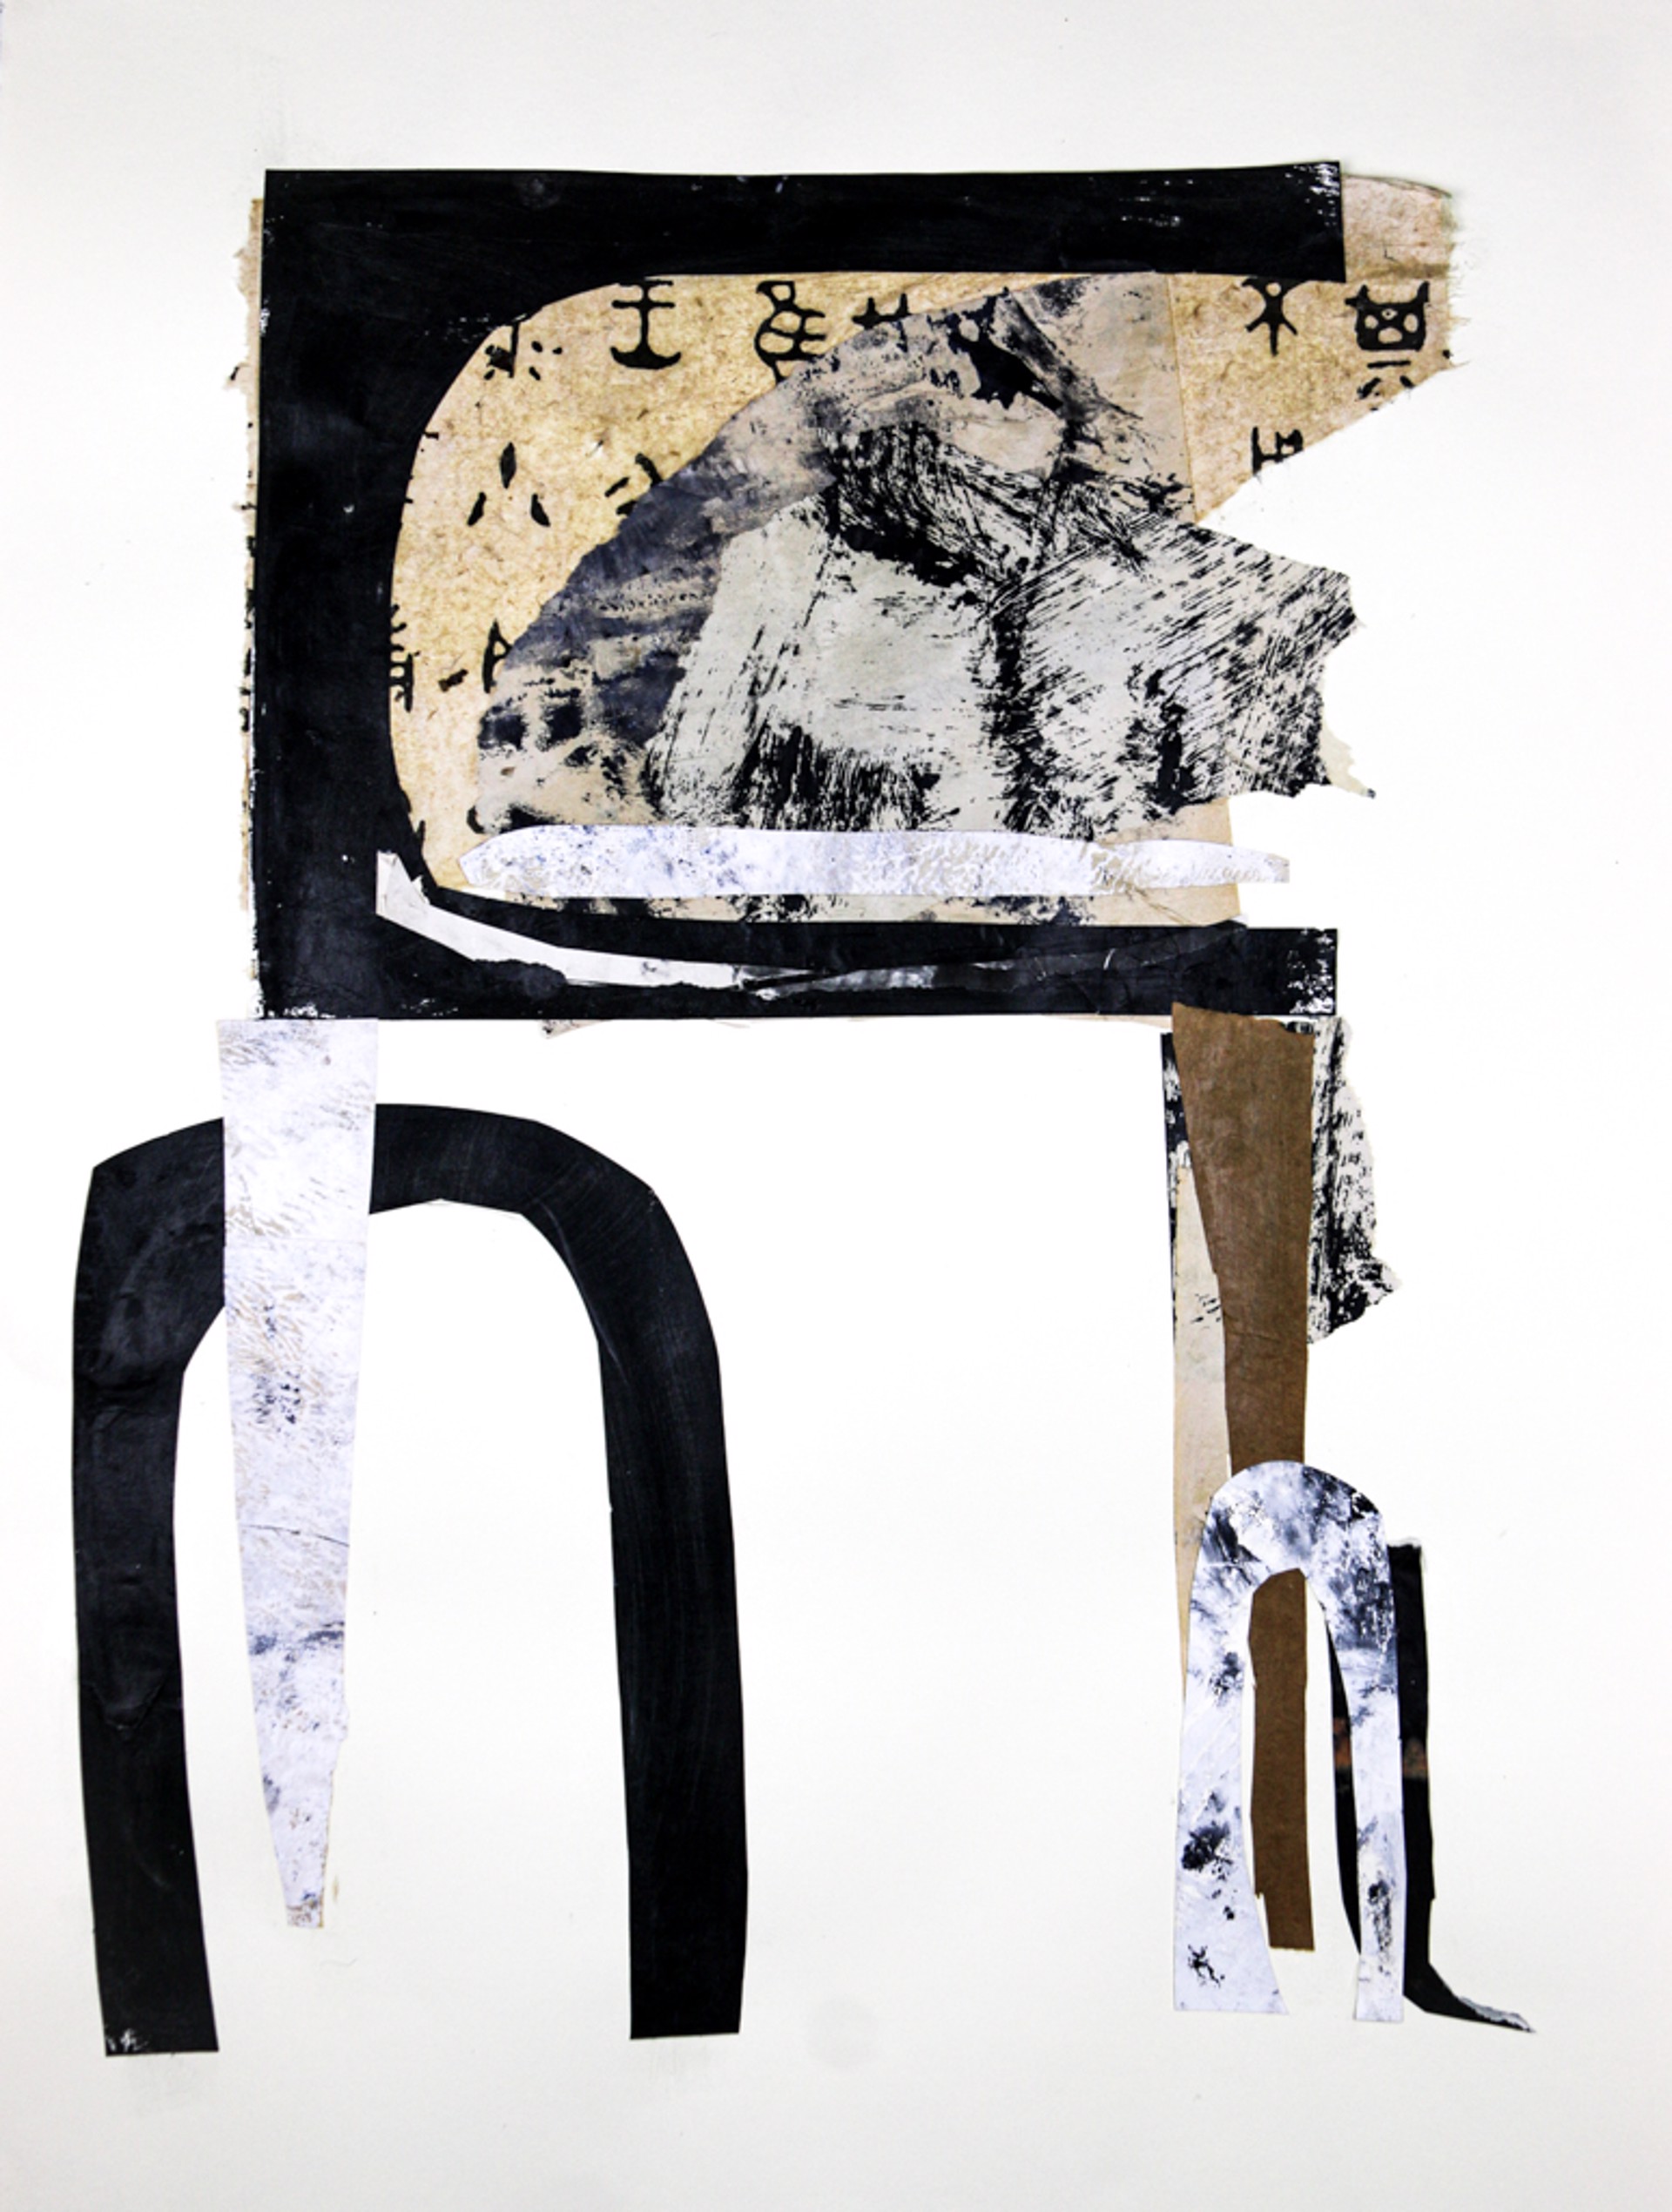 Seated (Chair 356) by Catie Radney